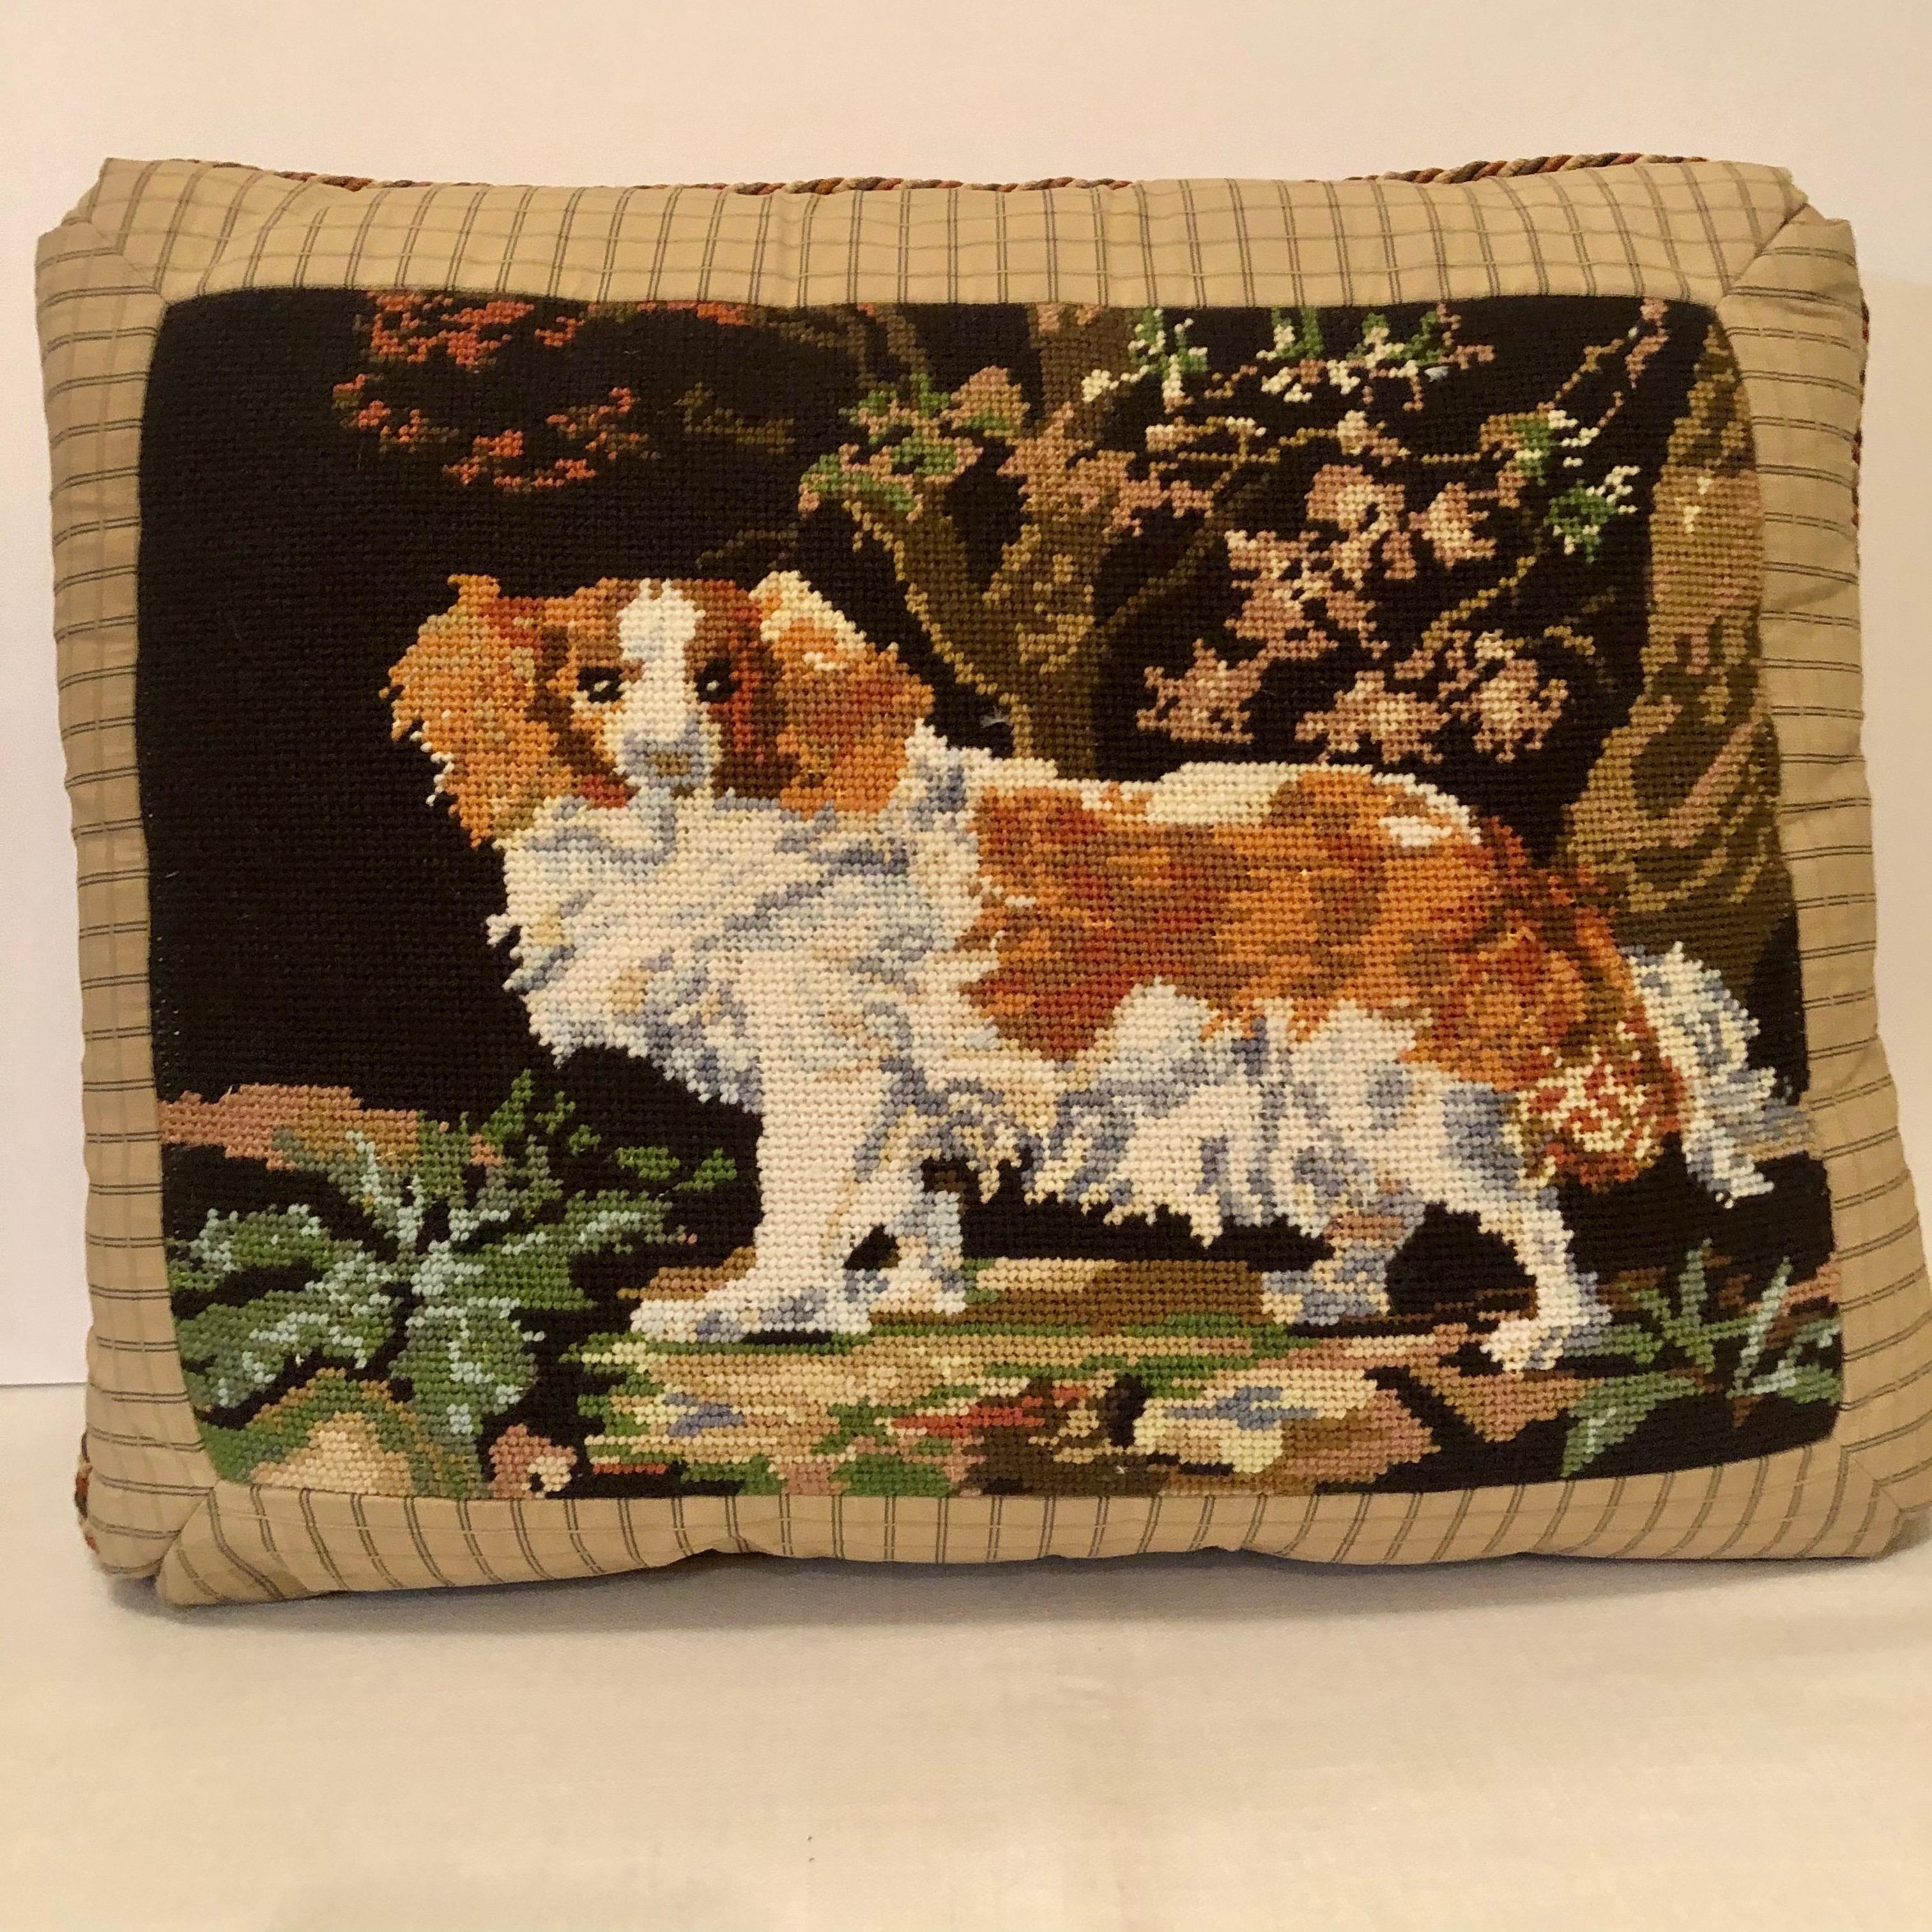 Beautiful and charming needlepoint pillow with a needlepoint picture of a King Charles spaniel playing in the woods. It has beige and brown cording around the pillow with a nice beige ground color fabric on the back. This pillow is in very good